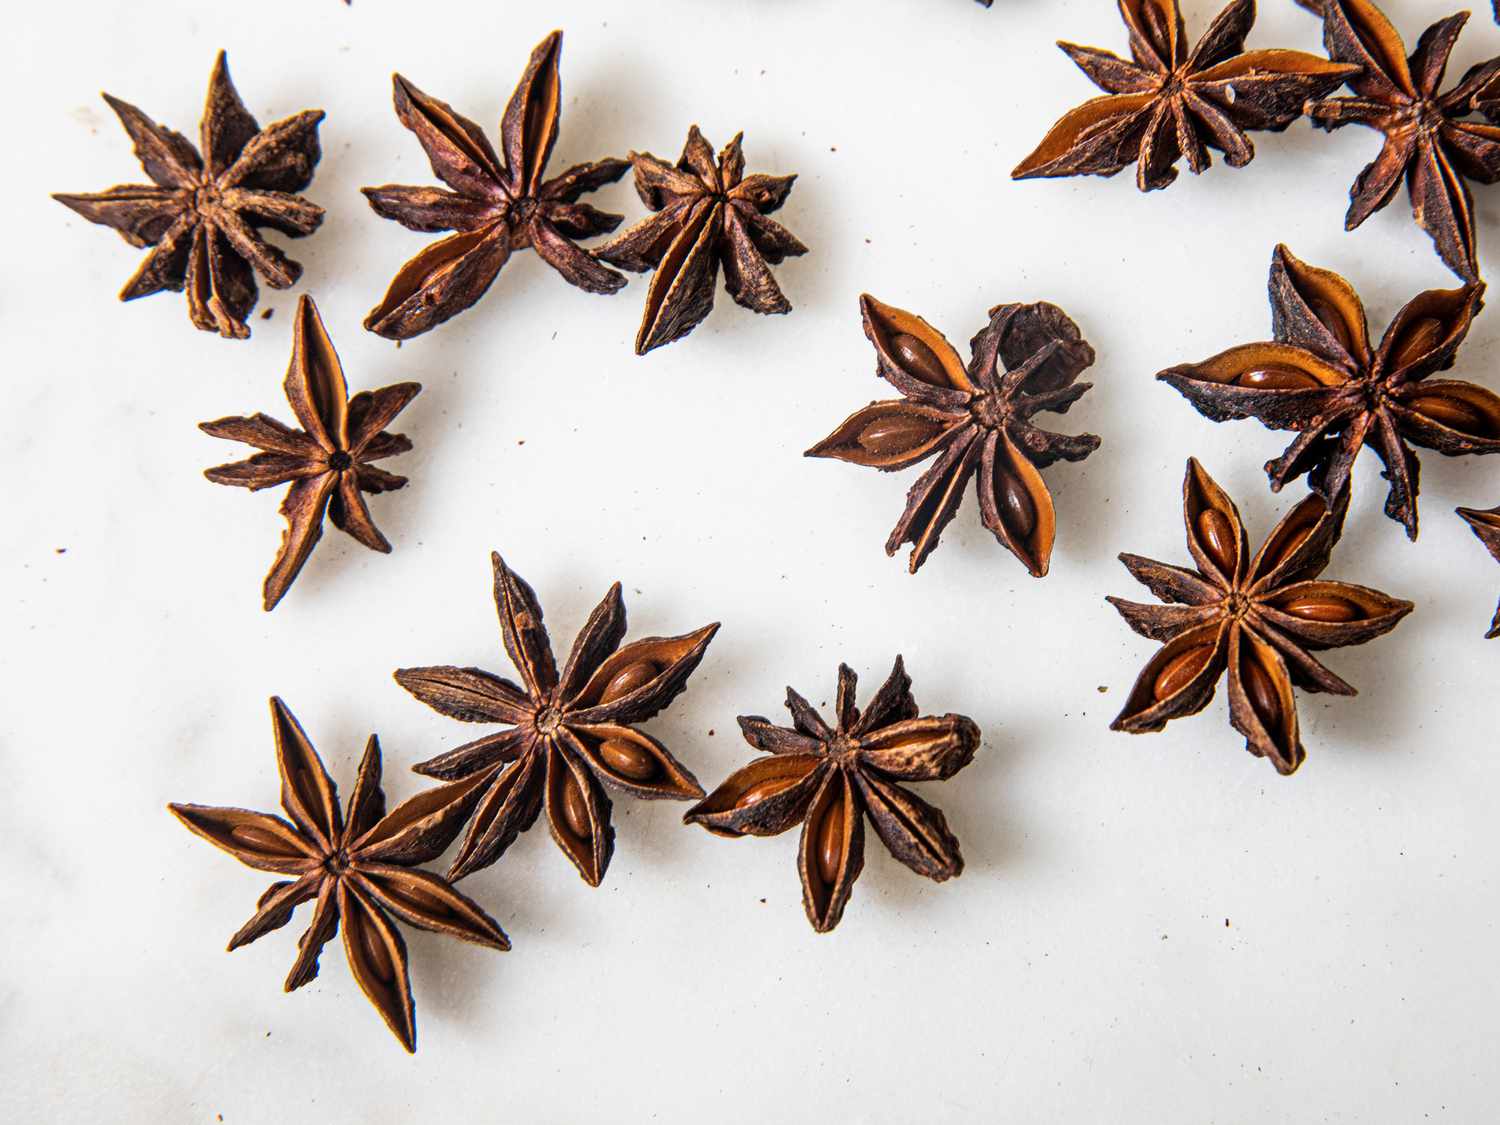 Overhead view of scattered star anise pods